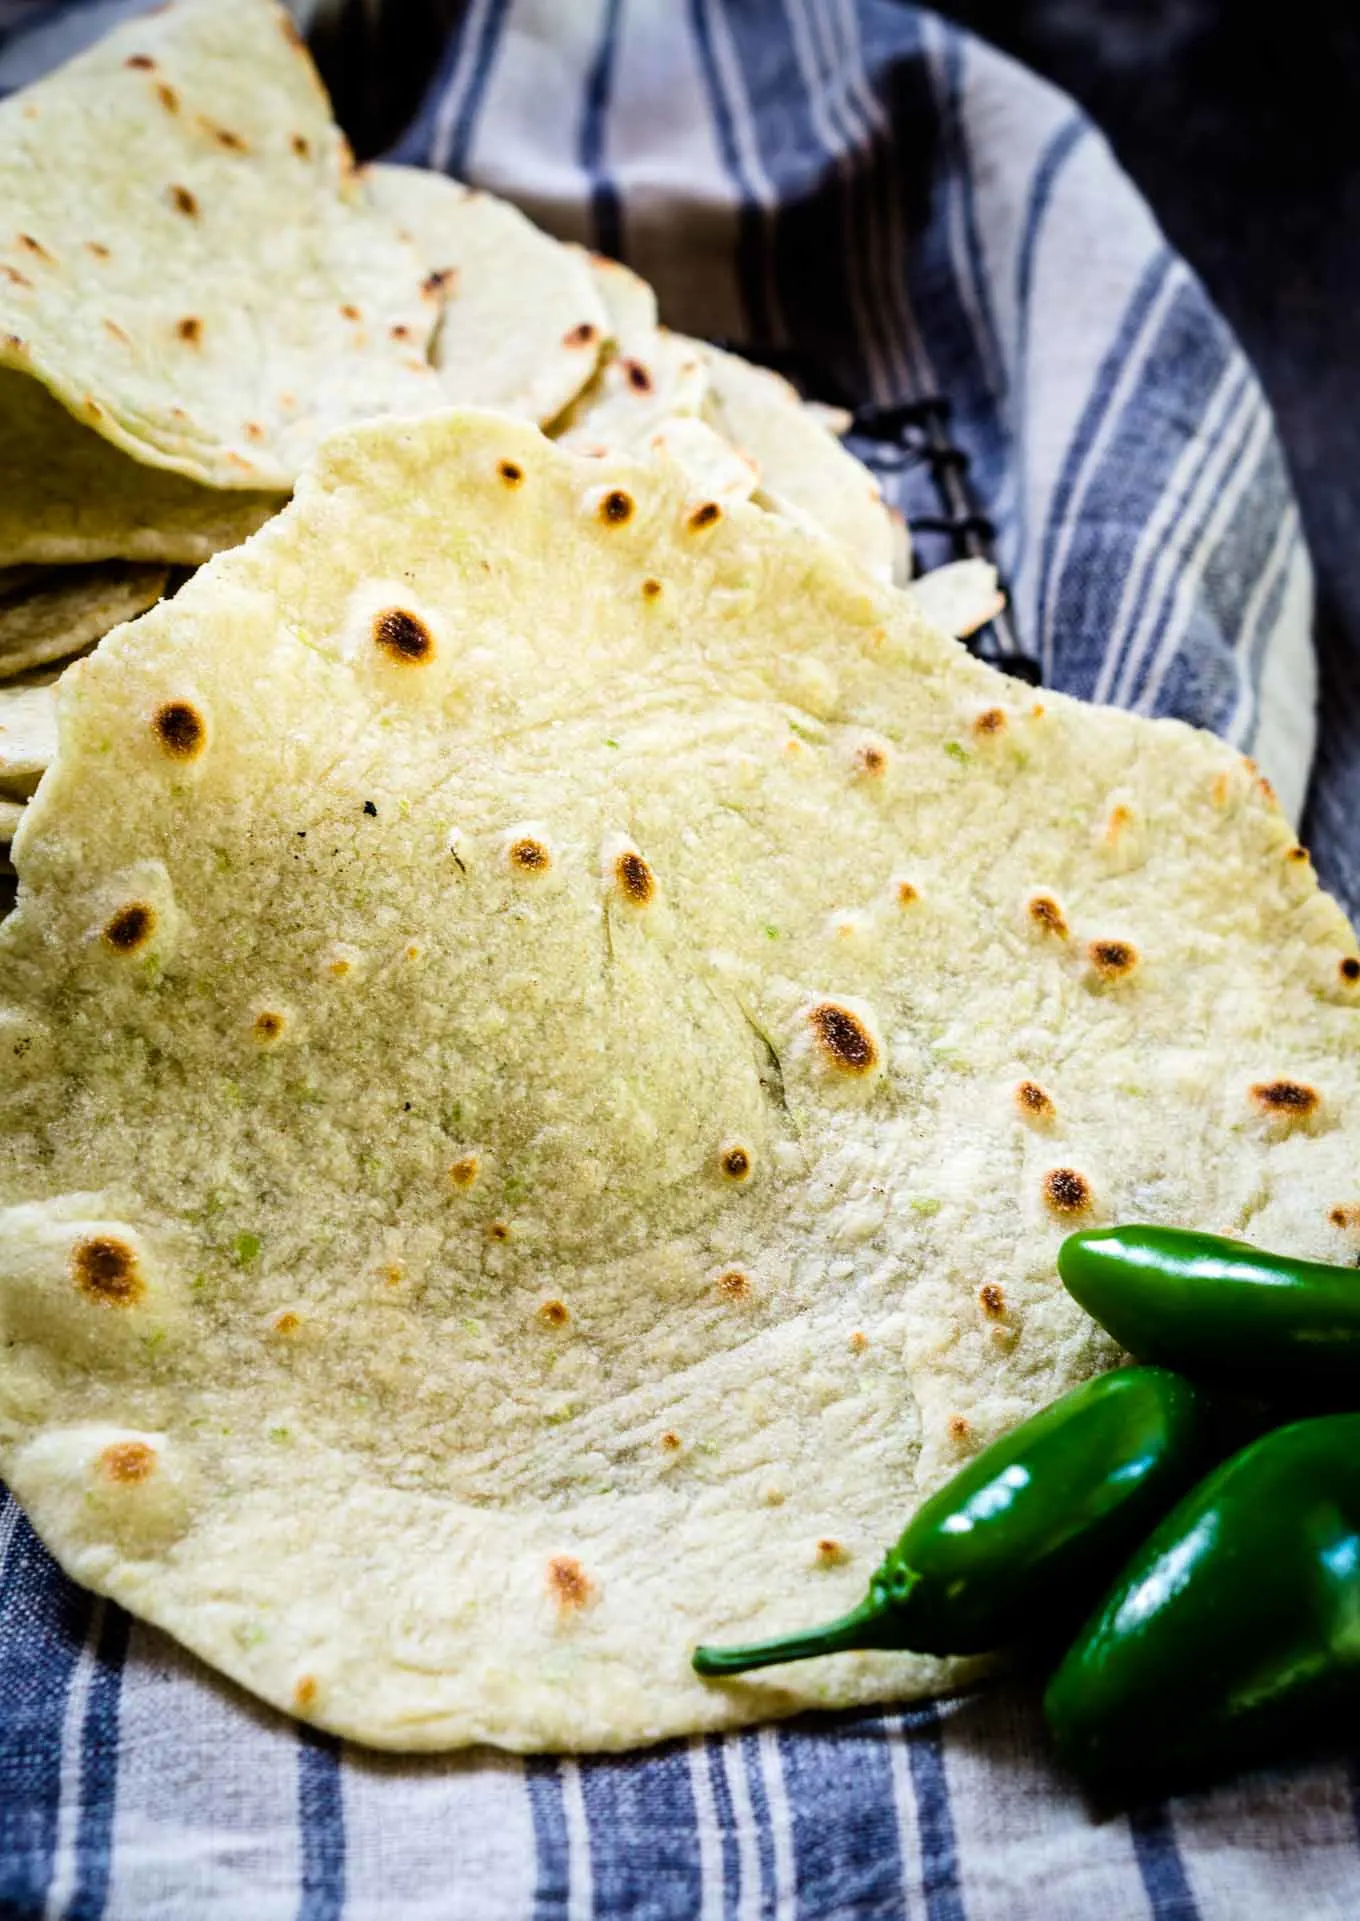 A close up of a fresh tortilla with fresh jalapenos sitting in the foreground.